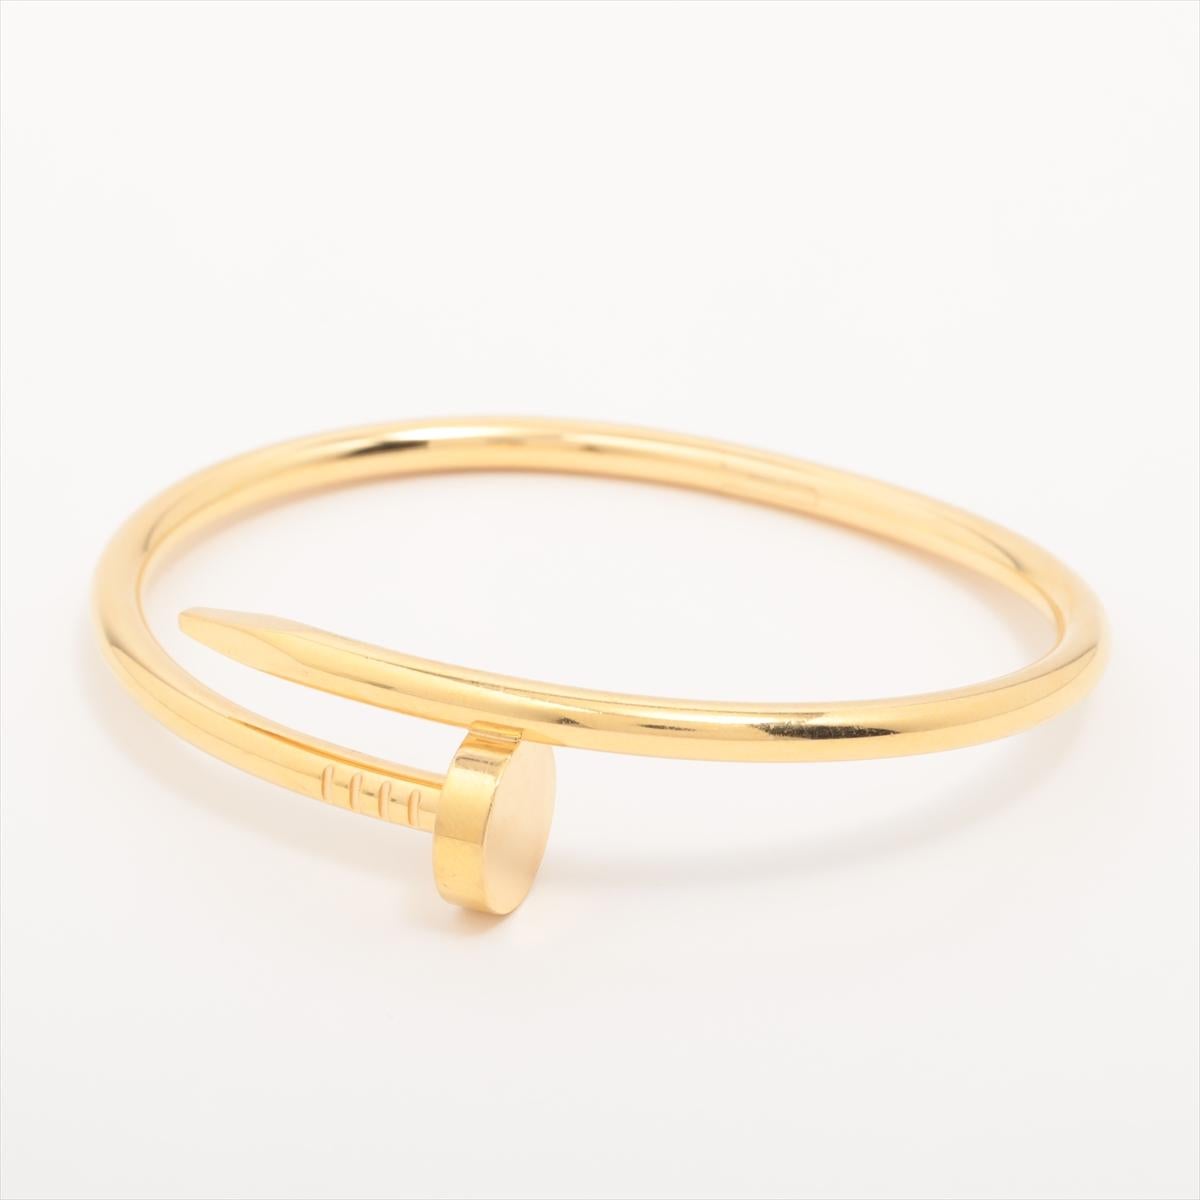 Brand : Cartier
Description:  Cartier Juste un Clou Bracelet 750YG
Metal Type: 750 (YG) /  Yellow Gold
Total Weight: 34.1g
Size: 17
Width: 3.5mm
Condition: Preowned; small signs of wearing
Box -  Included
Papers -  Included
